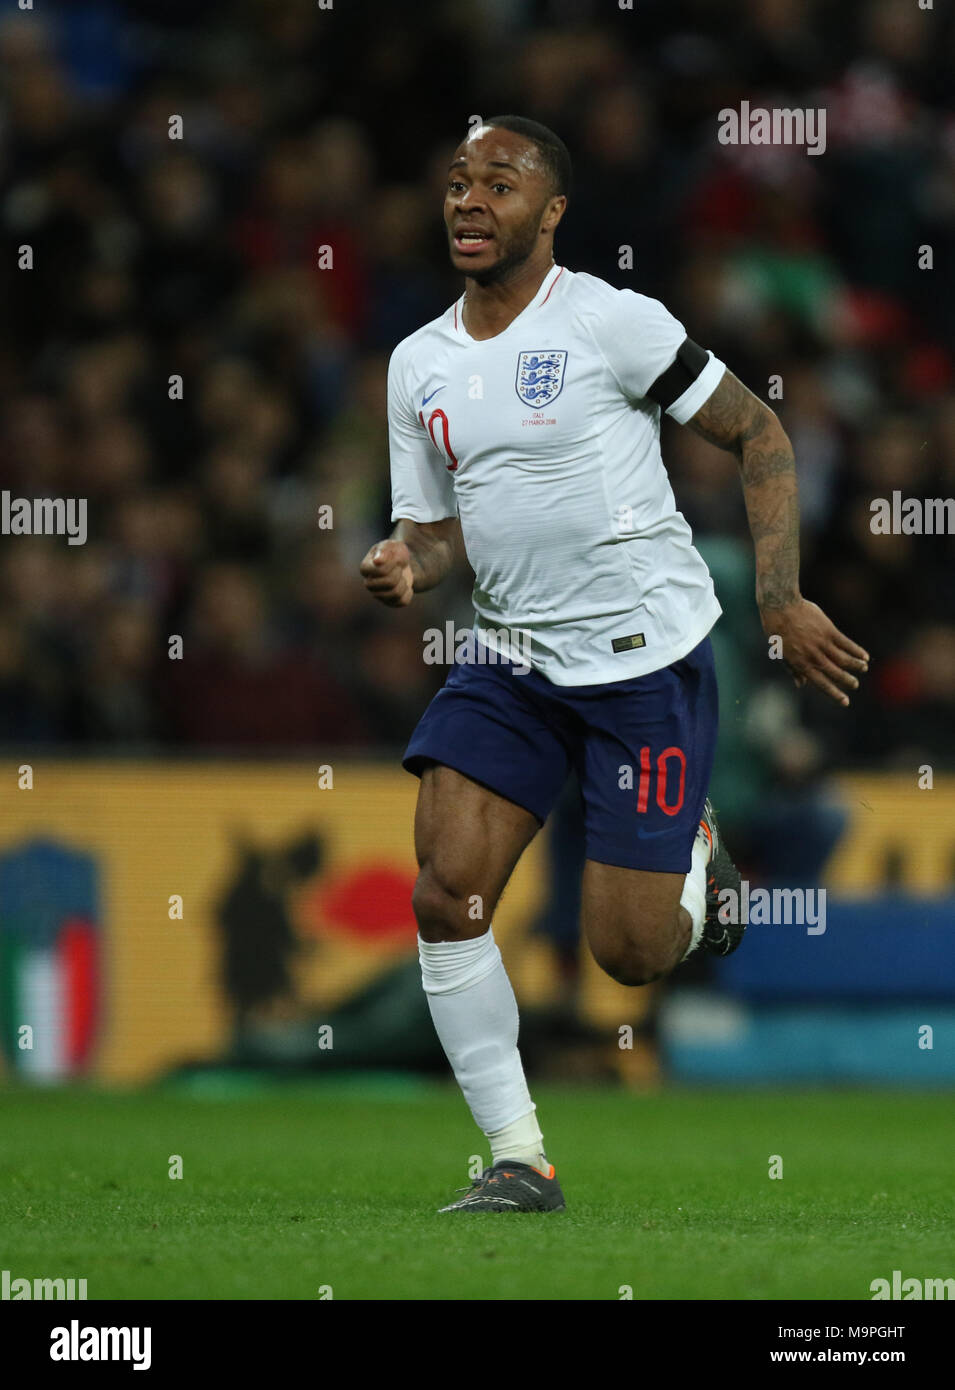 London, UK. 27th March, 2018. Raheem Sterling (E) at the England v Italy International Friendly football match, at Wembley Stadium, London, on March 27, 2018. **This picture is for editorial use only** Credit: Paul Marriott/Alamy Live News Stock Photo